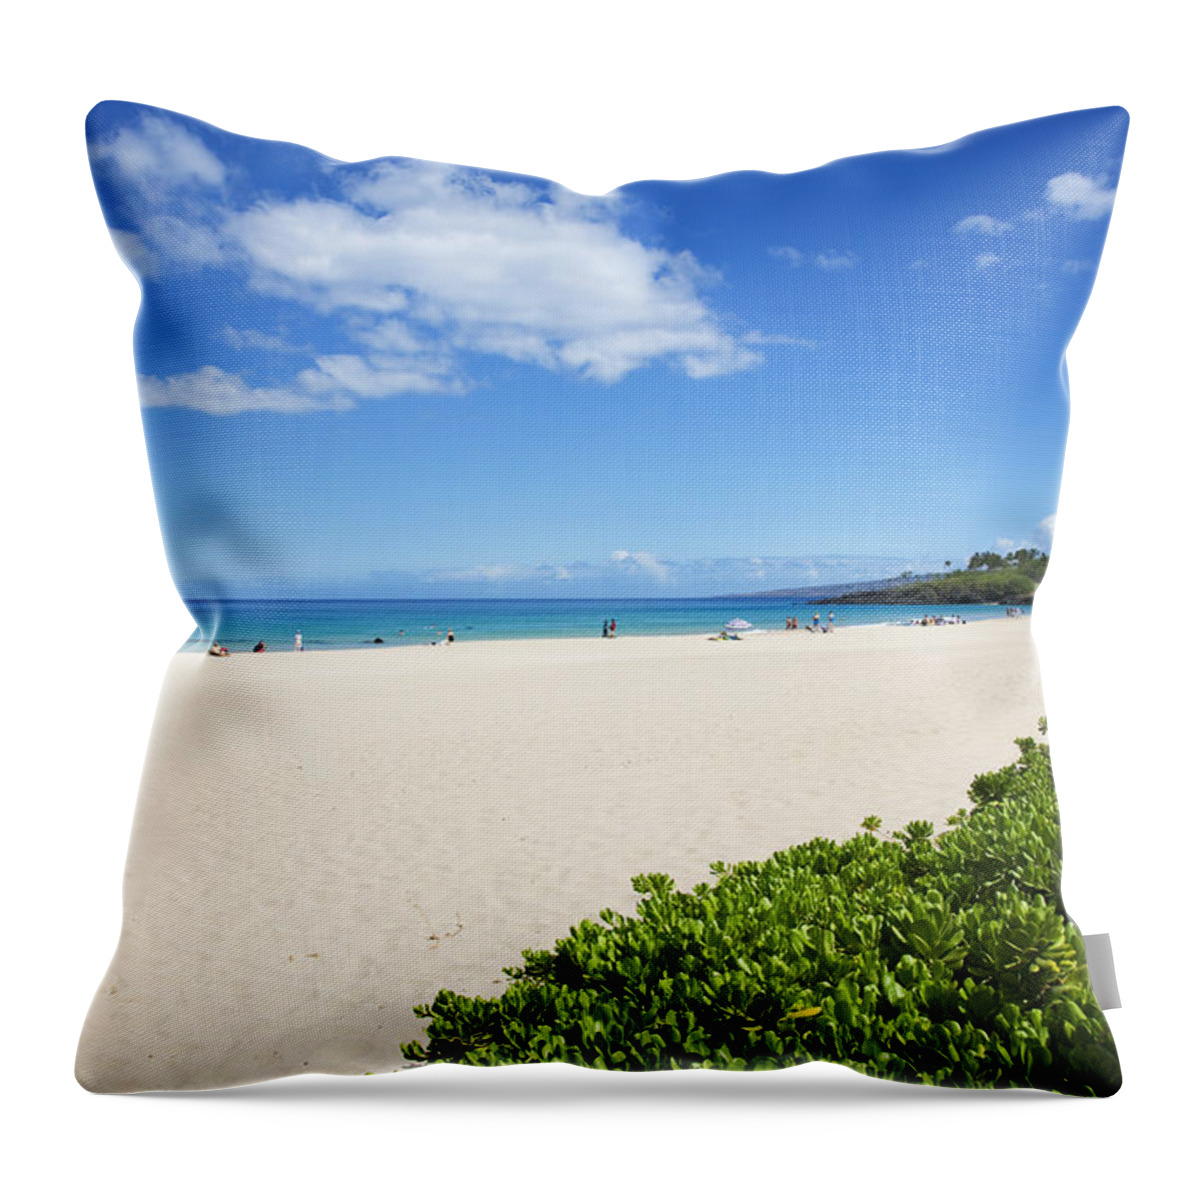 Aqua Throw Pillow featuring the photograph Hapuna Beach #1 by Ron Dahlquist - Printscapes